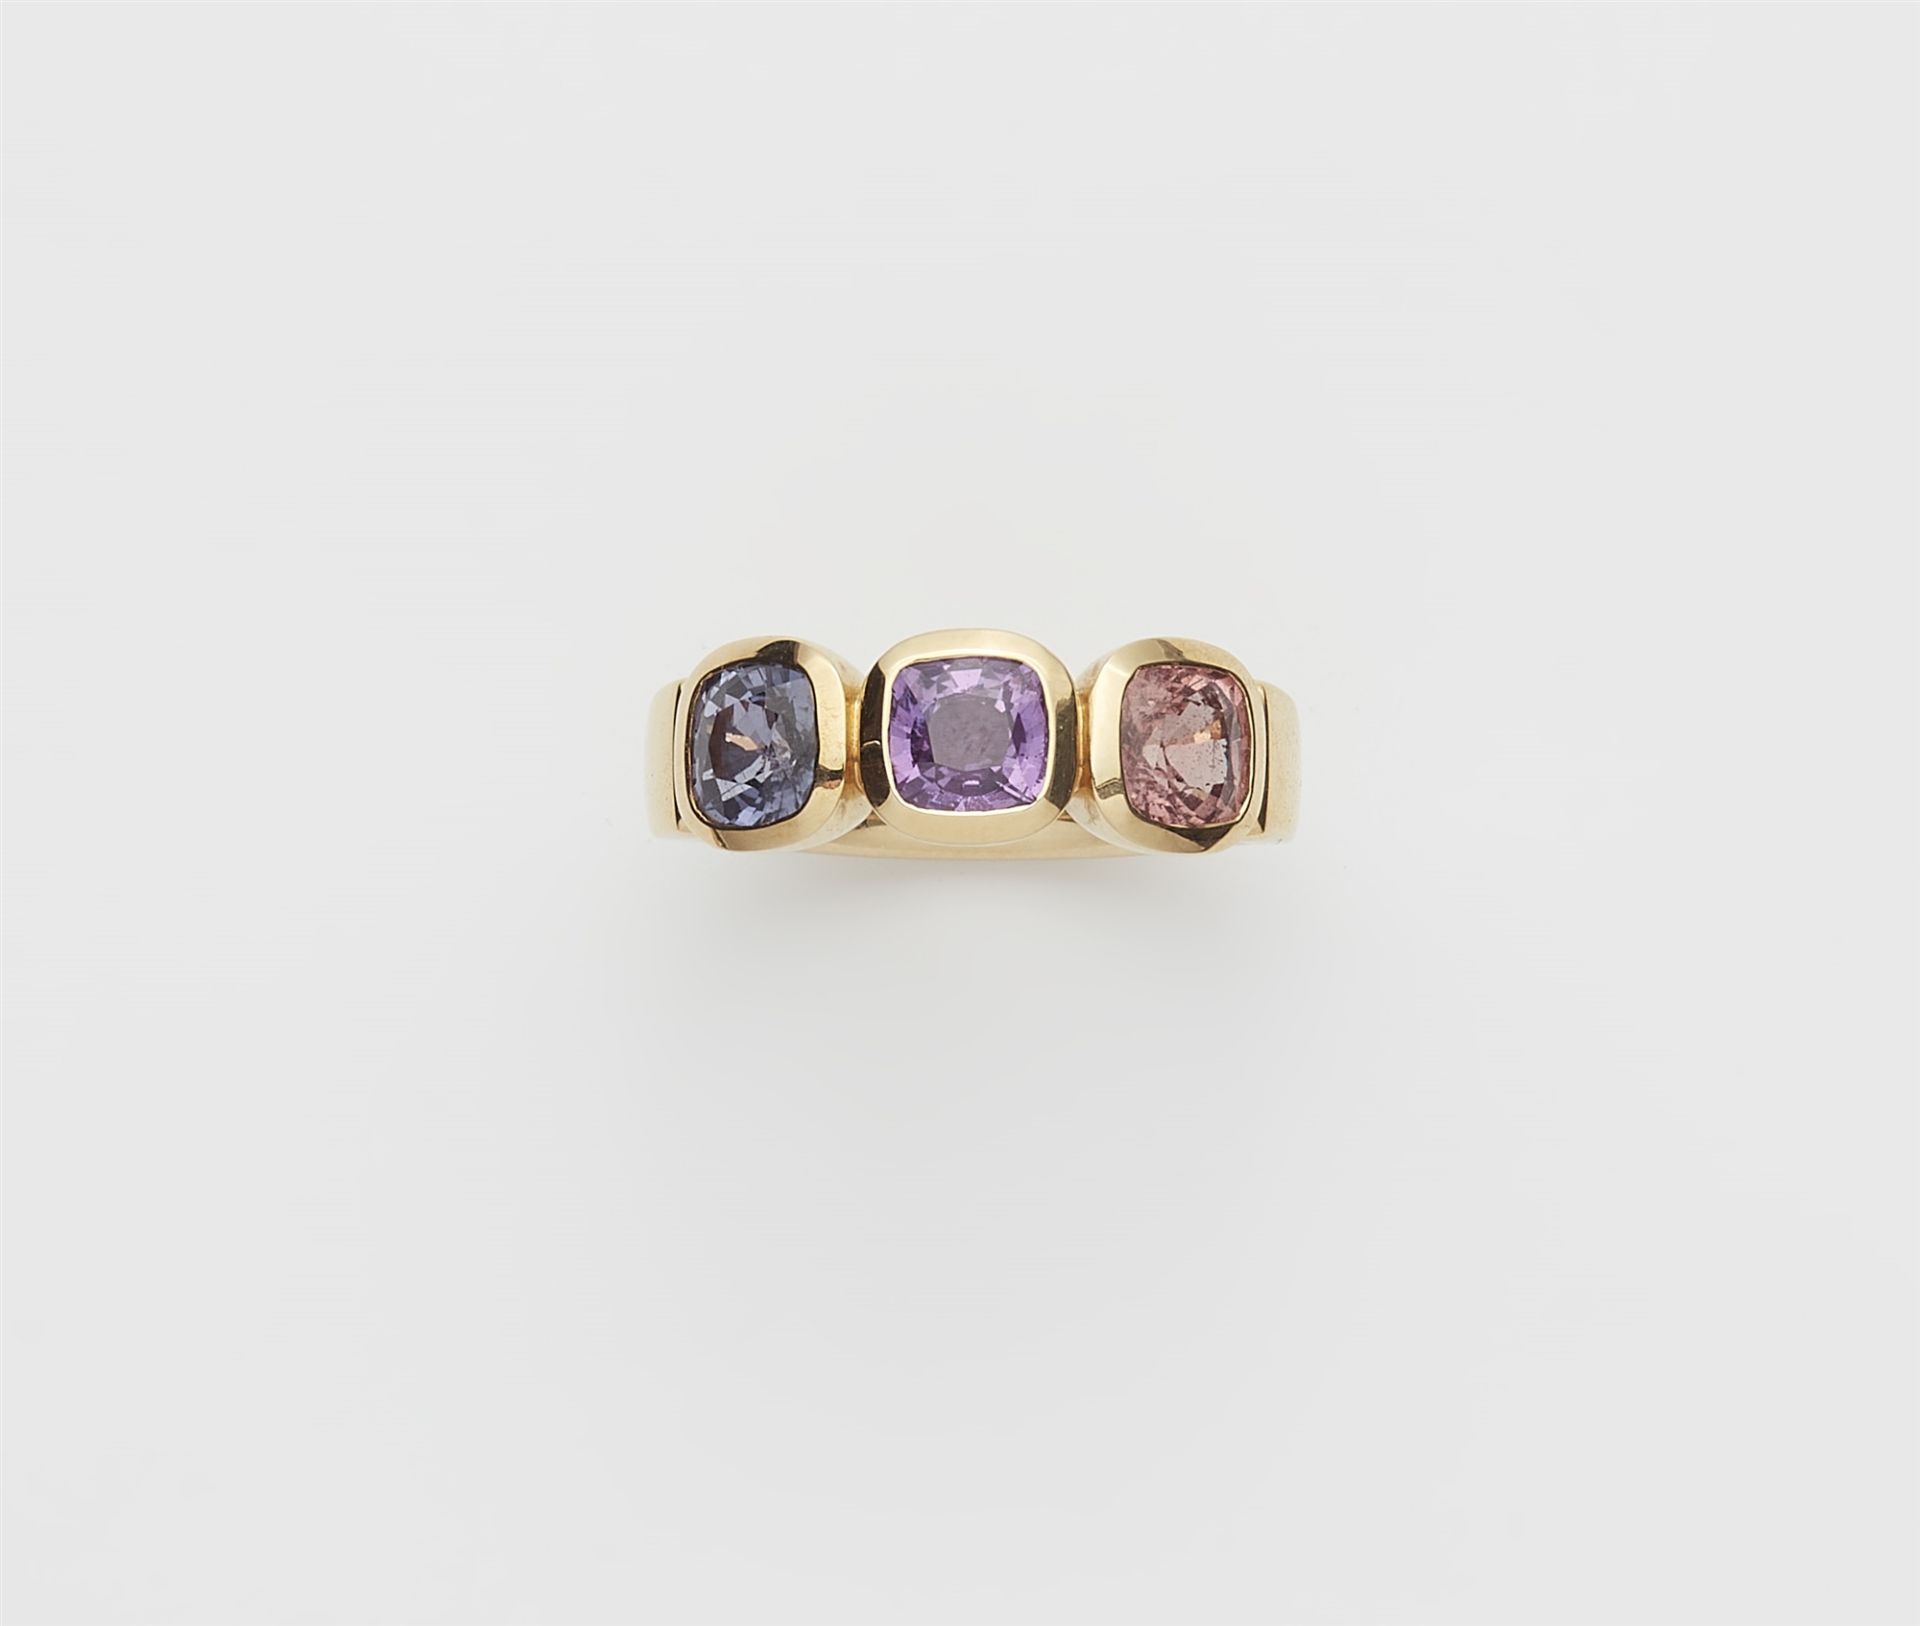 A German 18k gold and coloured sapphire three stone ring.